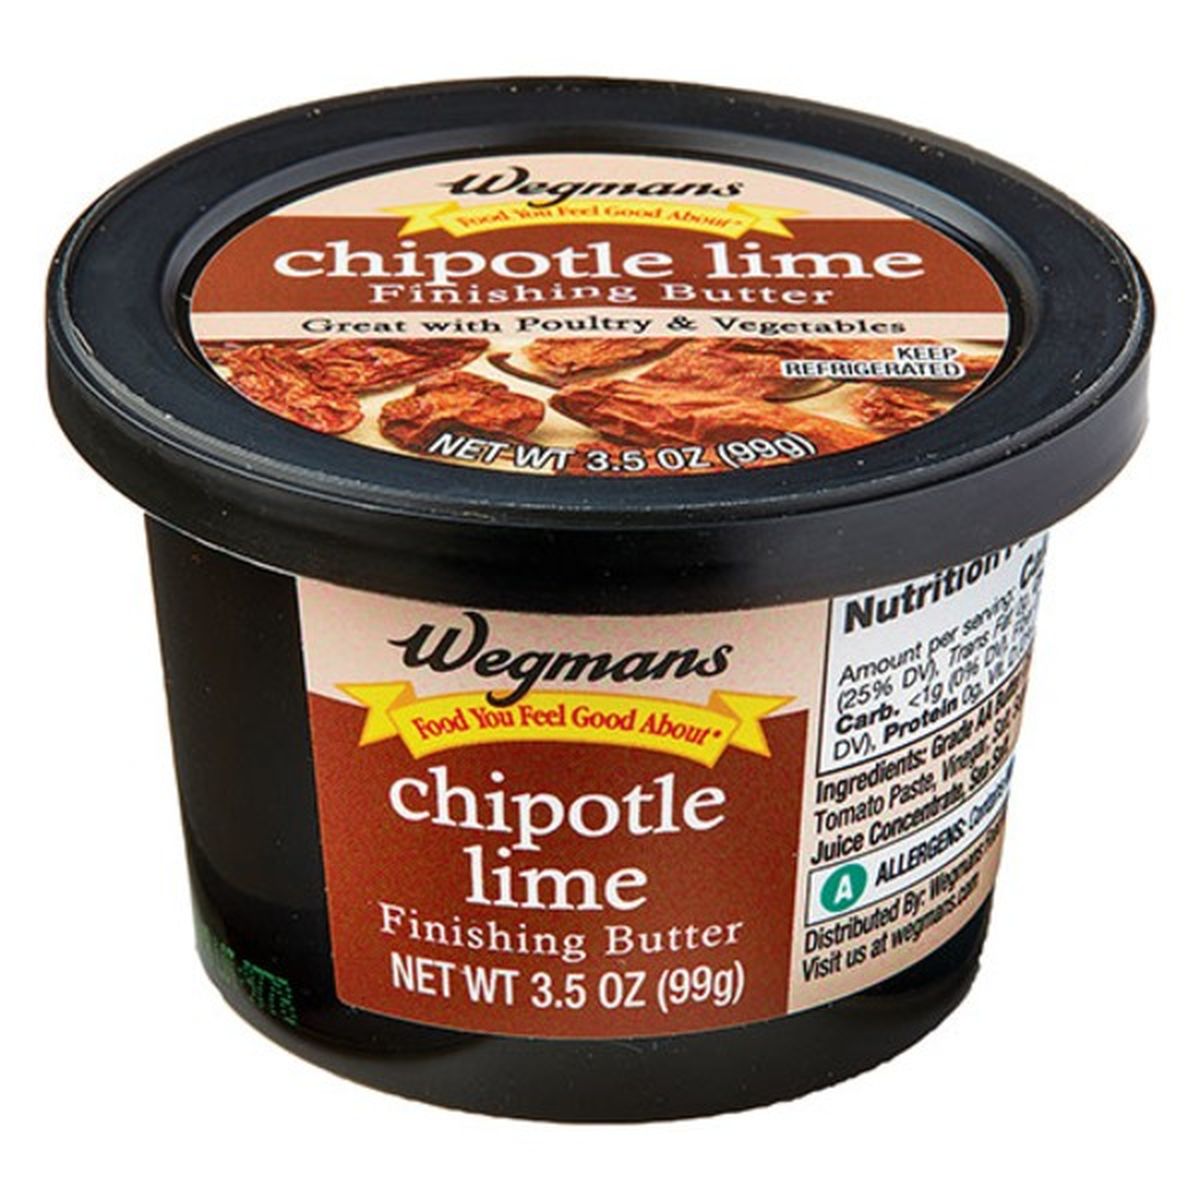 Calories in Wegmans Chipotle Lime Finishing Butter